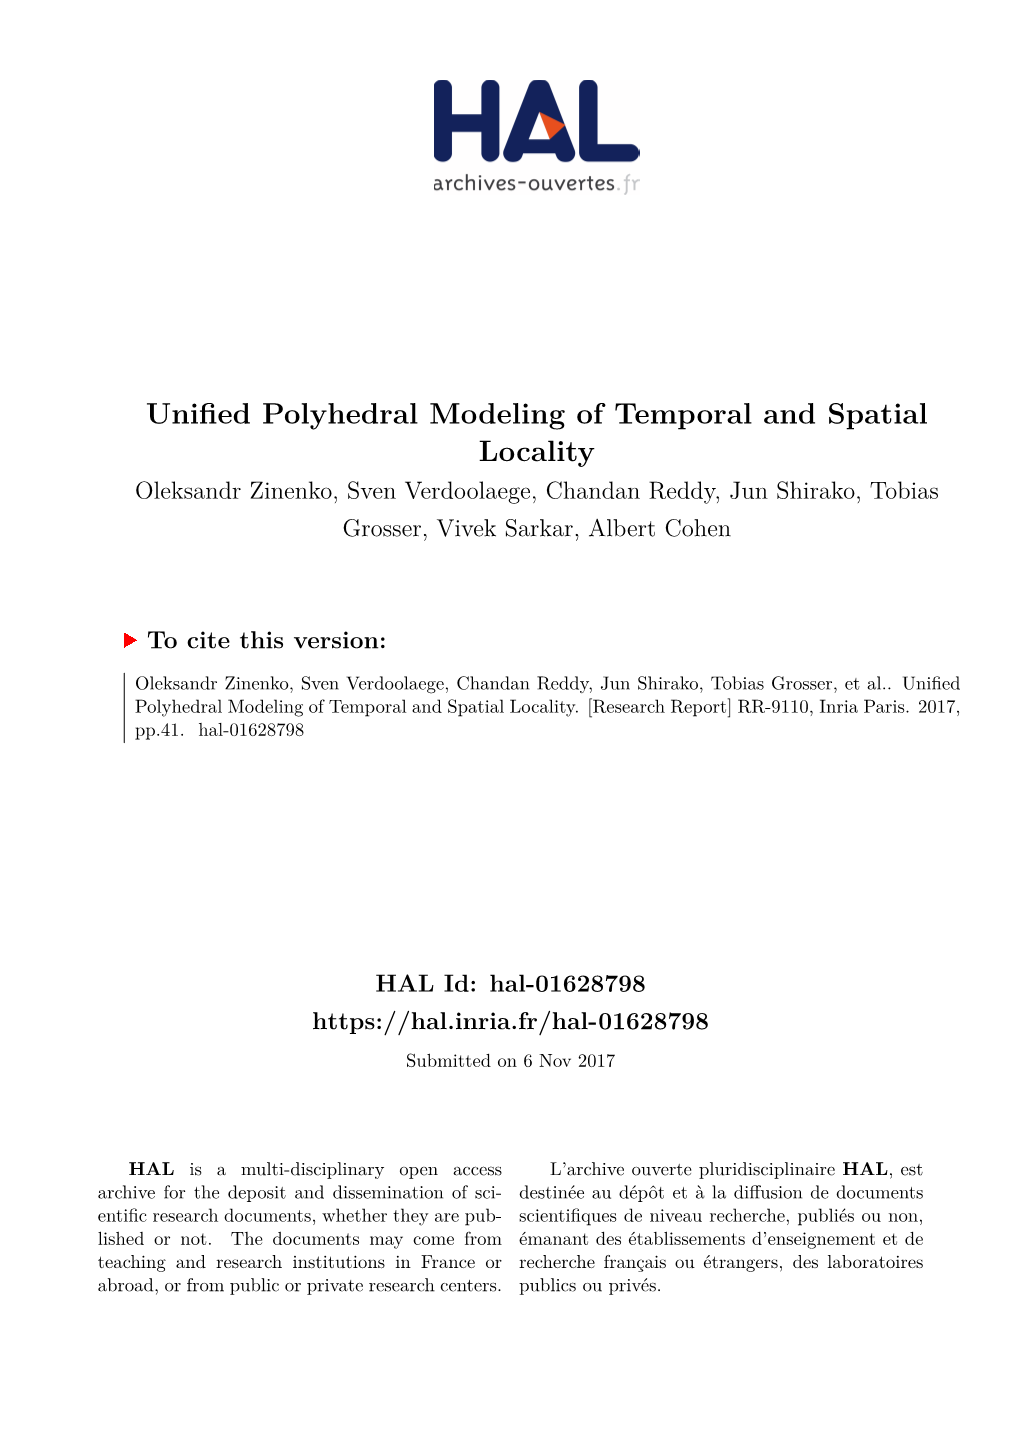 Unified Polyhedral Modeling of Temporal and Spatial Locality